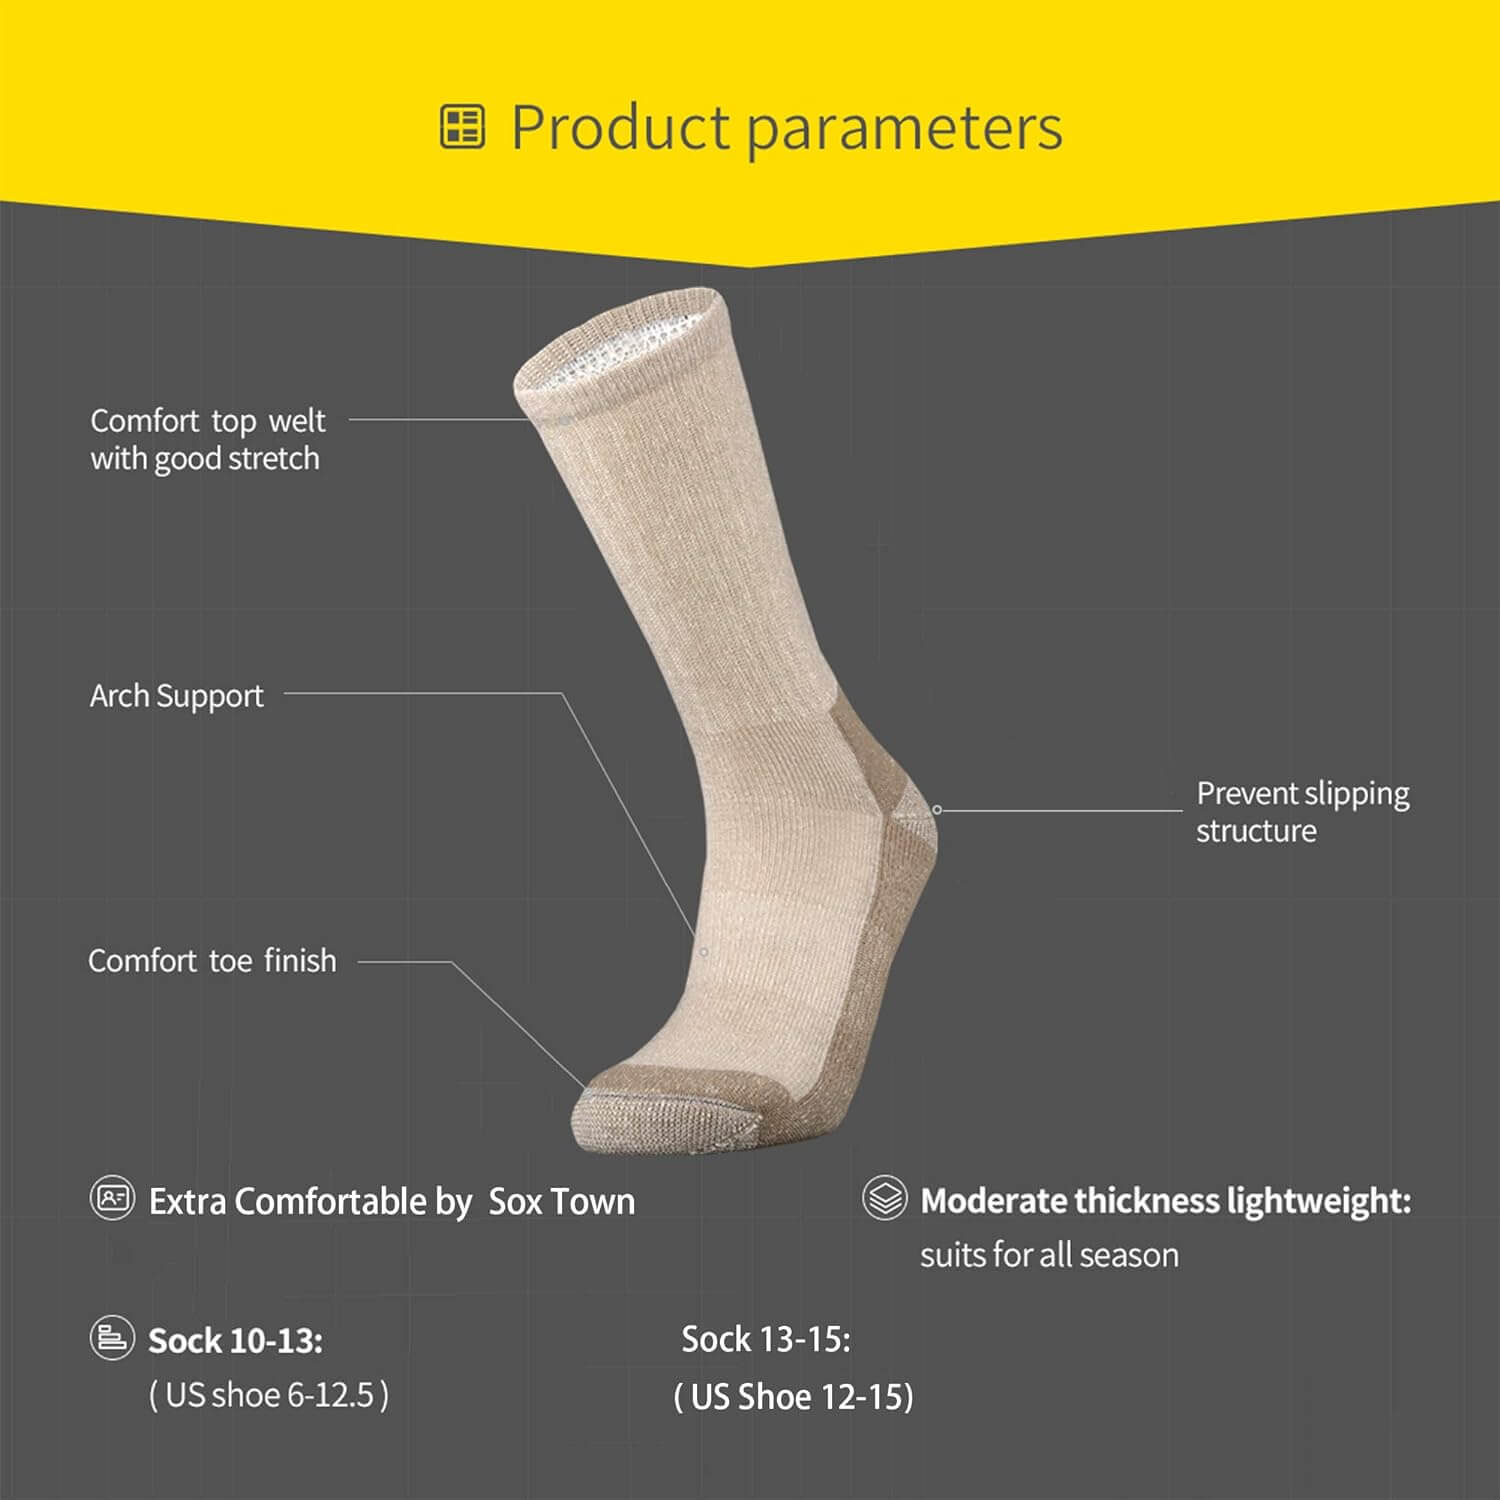 Shop The Latest >SOX TOWN Men's Merino Wool Cushion Crew Socks > *Only $32.19*> From The Top Brand > *Sox Townl* > Shop Now and Get Free Shipping On Orders Over $45.00 >*Shop Earth Foot*